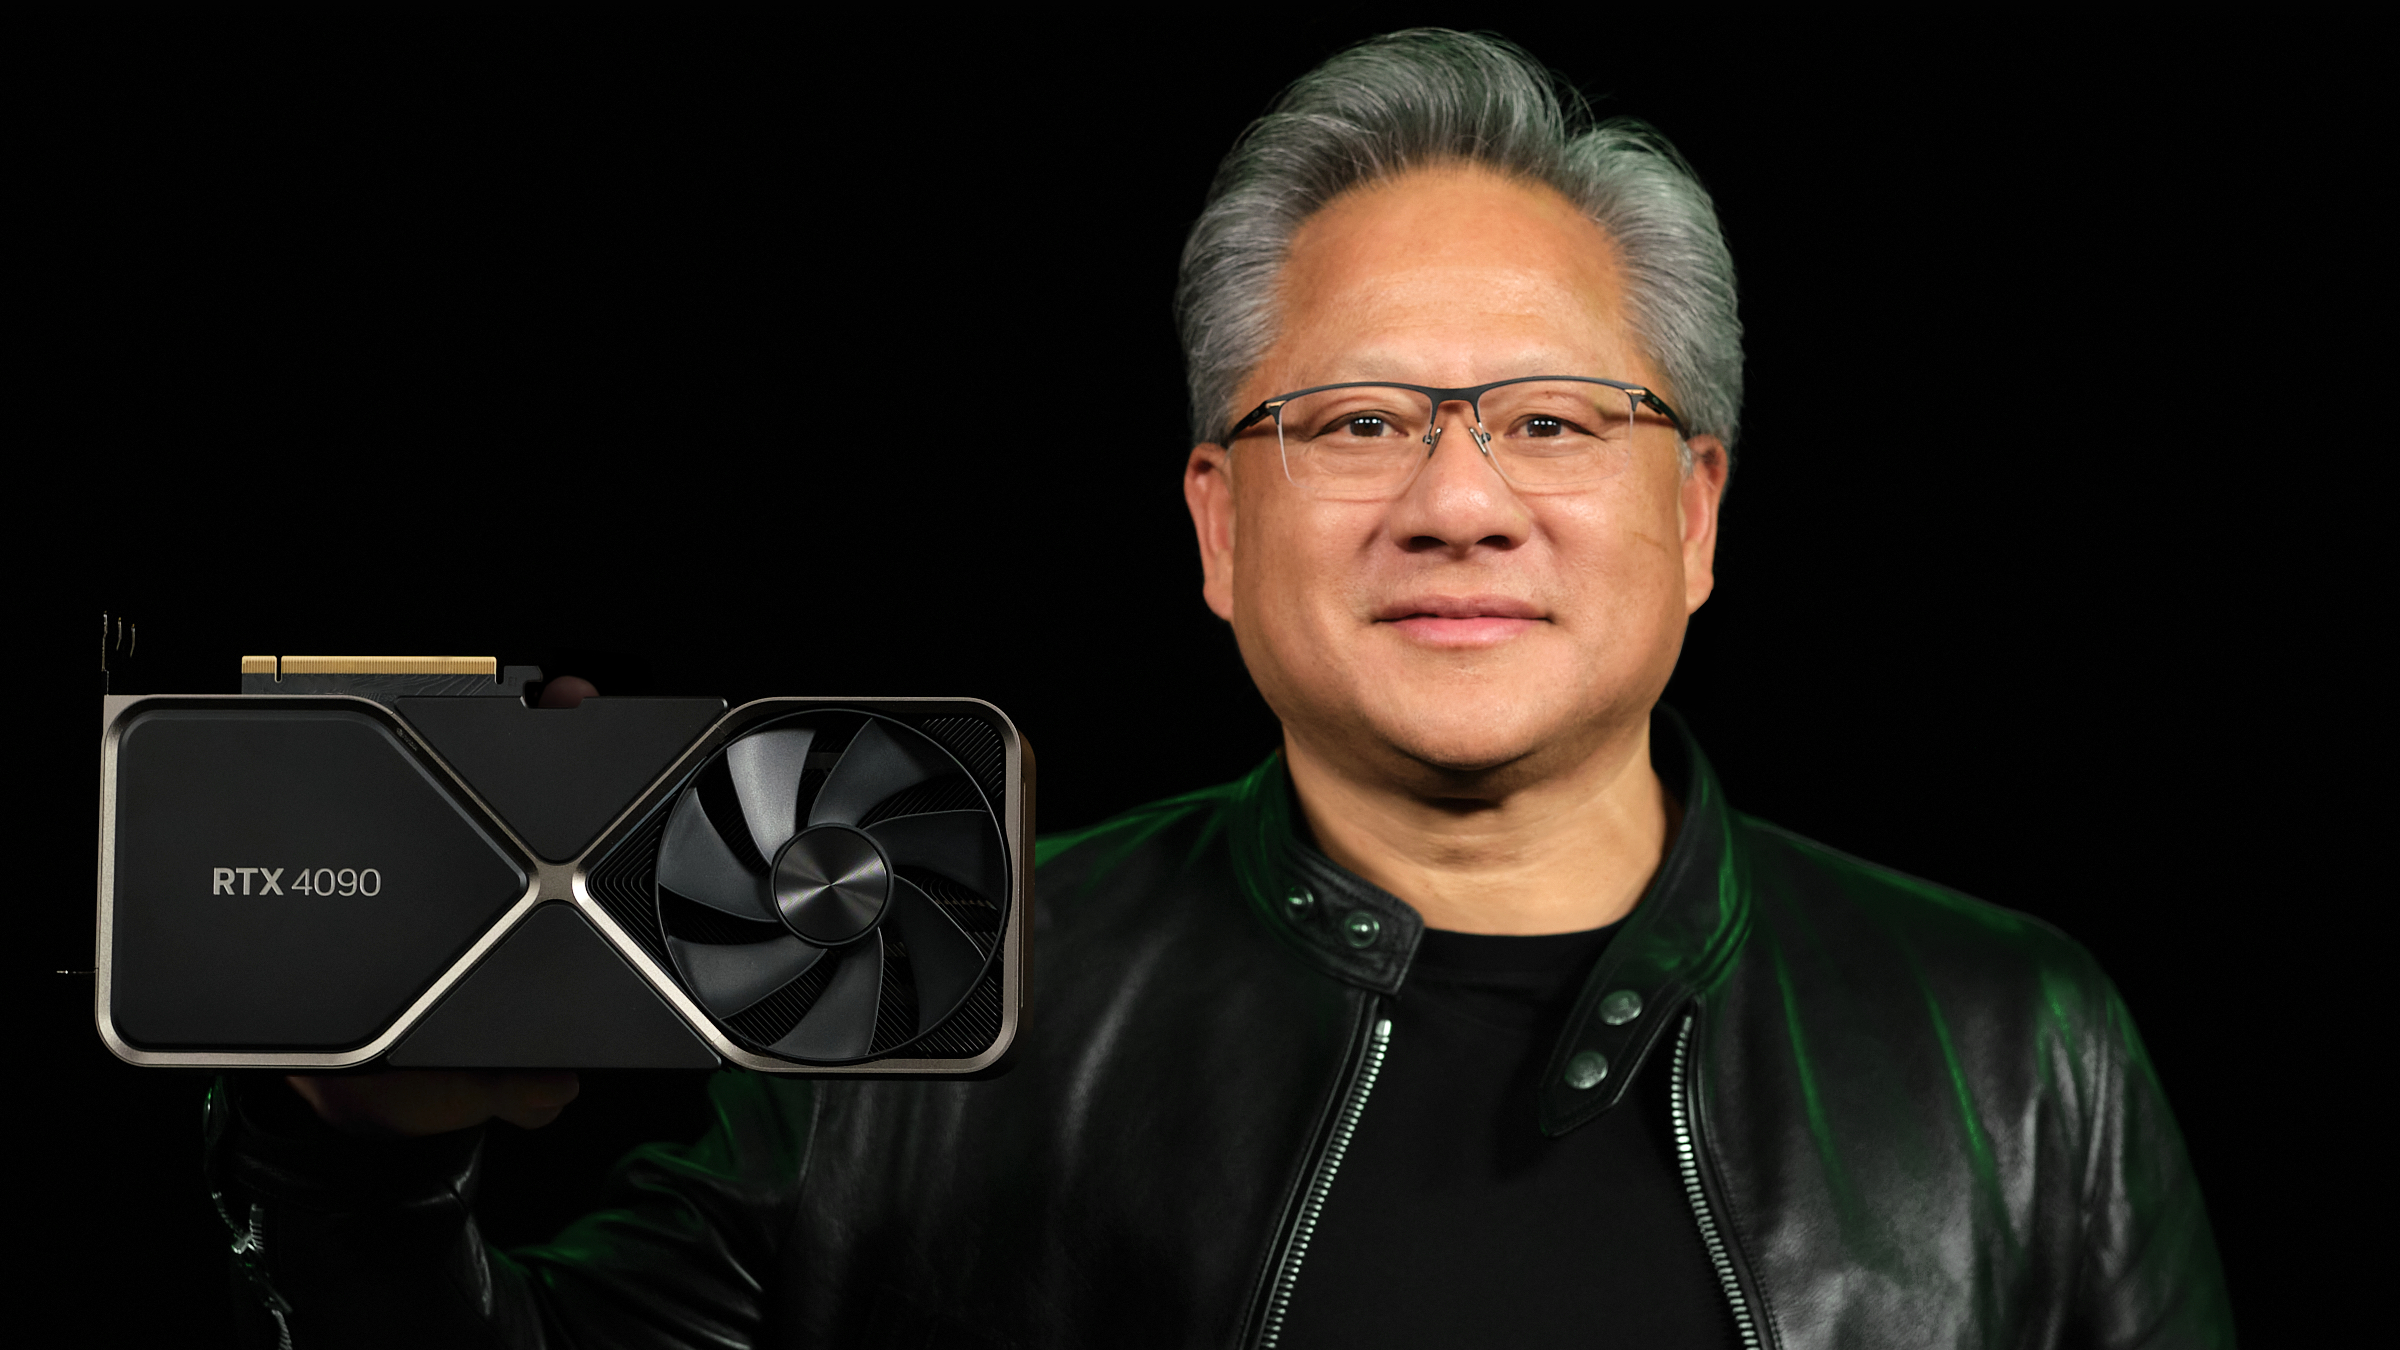 Nvidia GeForce RTX 4090 being held by Nvidia CEO Jensen Huang